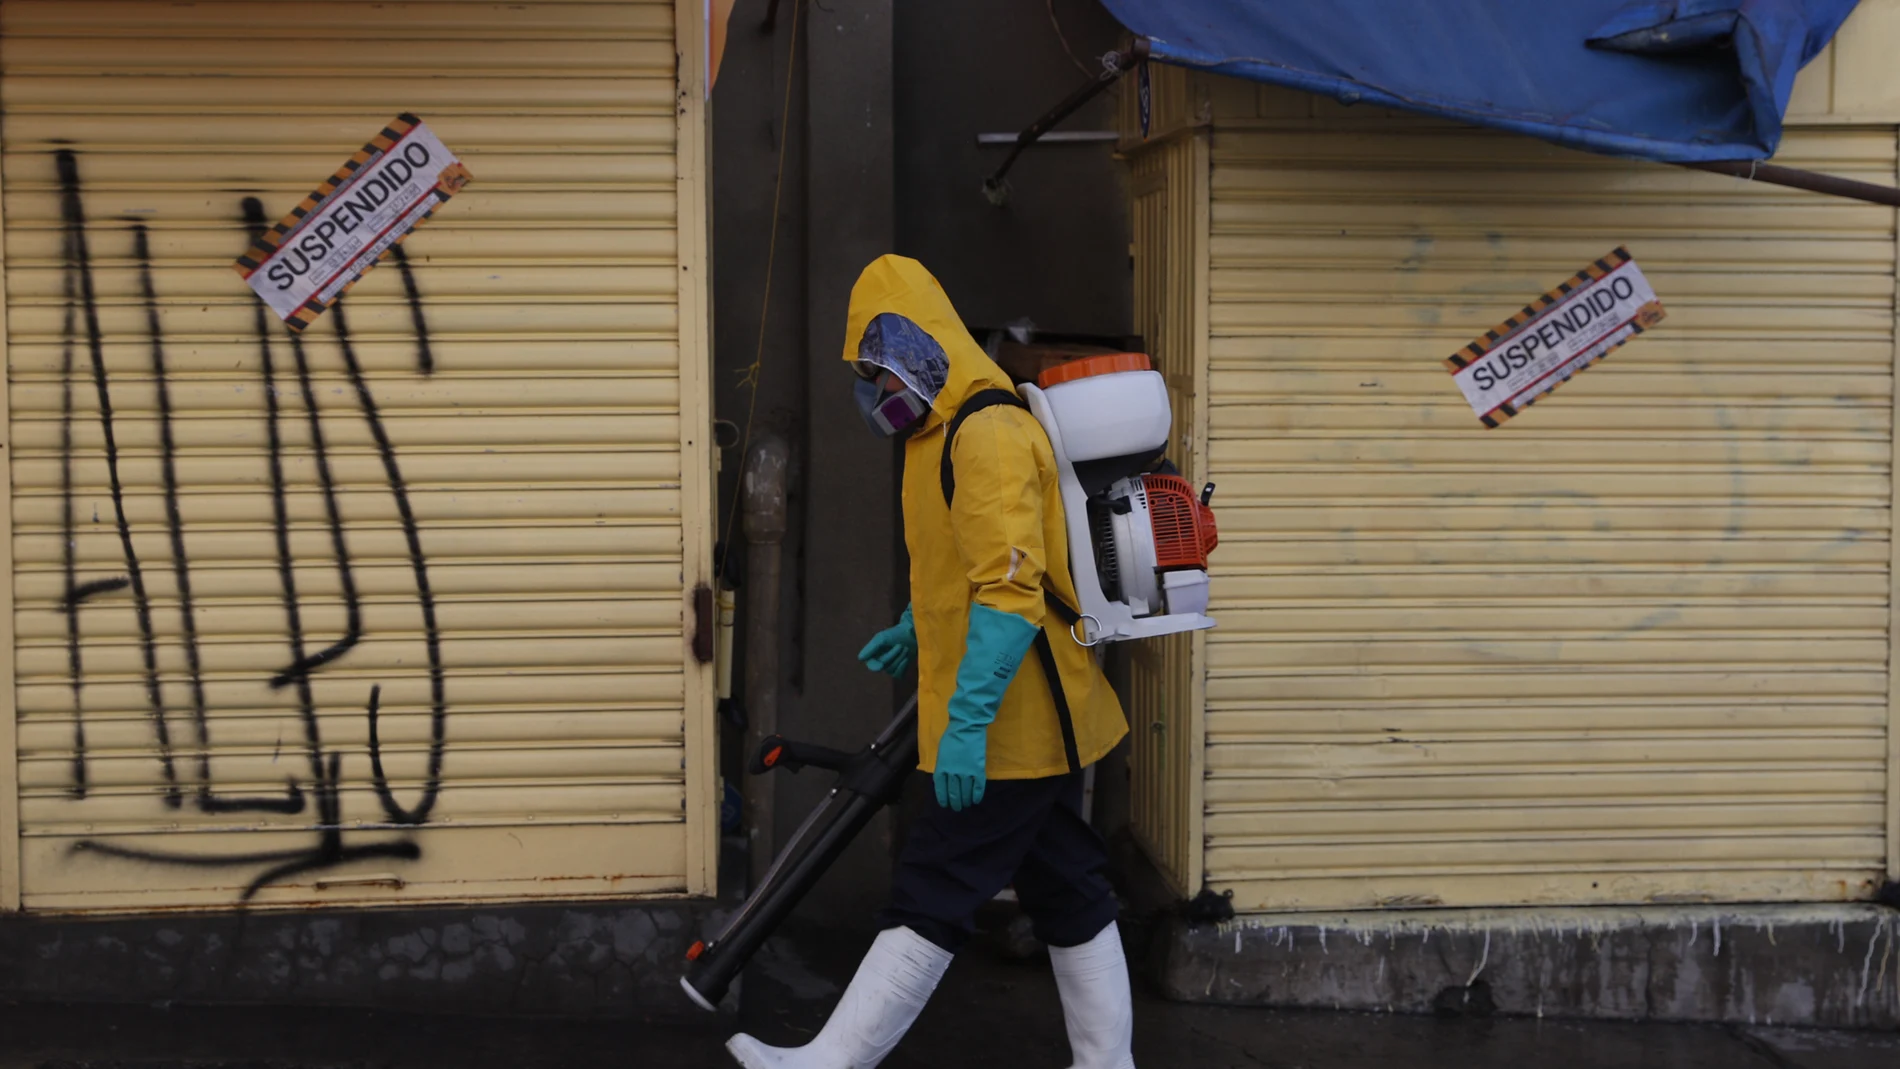 A city worker in full protective gear amid the new coronavirus pandemic disinfects the sidewalk outside the Haiti market in La Paz, Bolivia, Tuesday, June 23, 2020. Health authorities say that a butcher at the marker died several weeks ago of COVID related symptoms, prompting its closure. (AP Photo/Juan Karita)